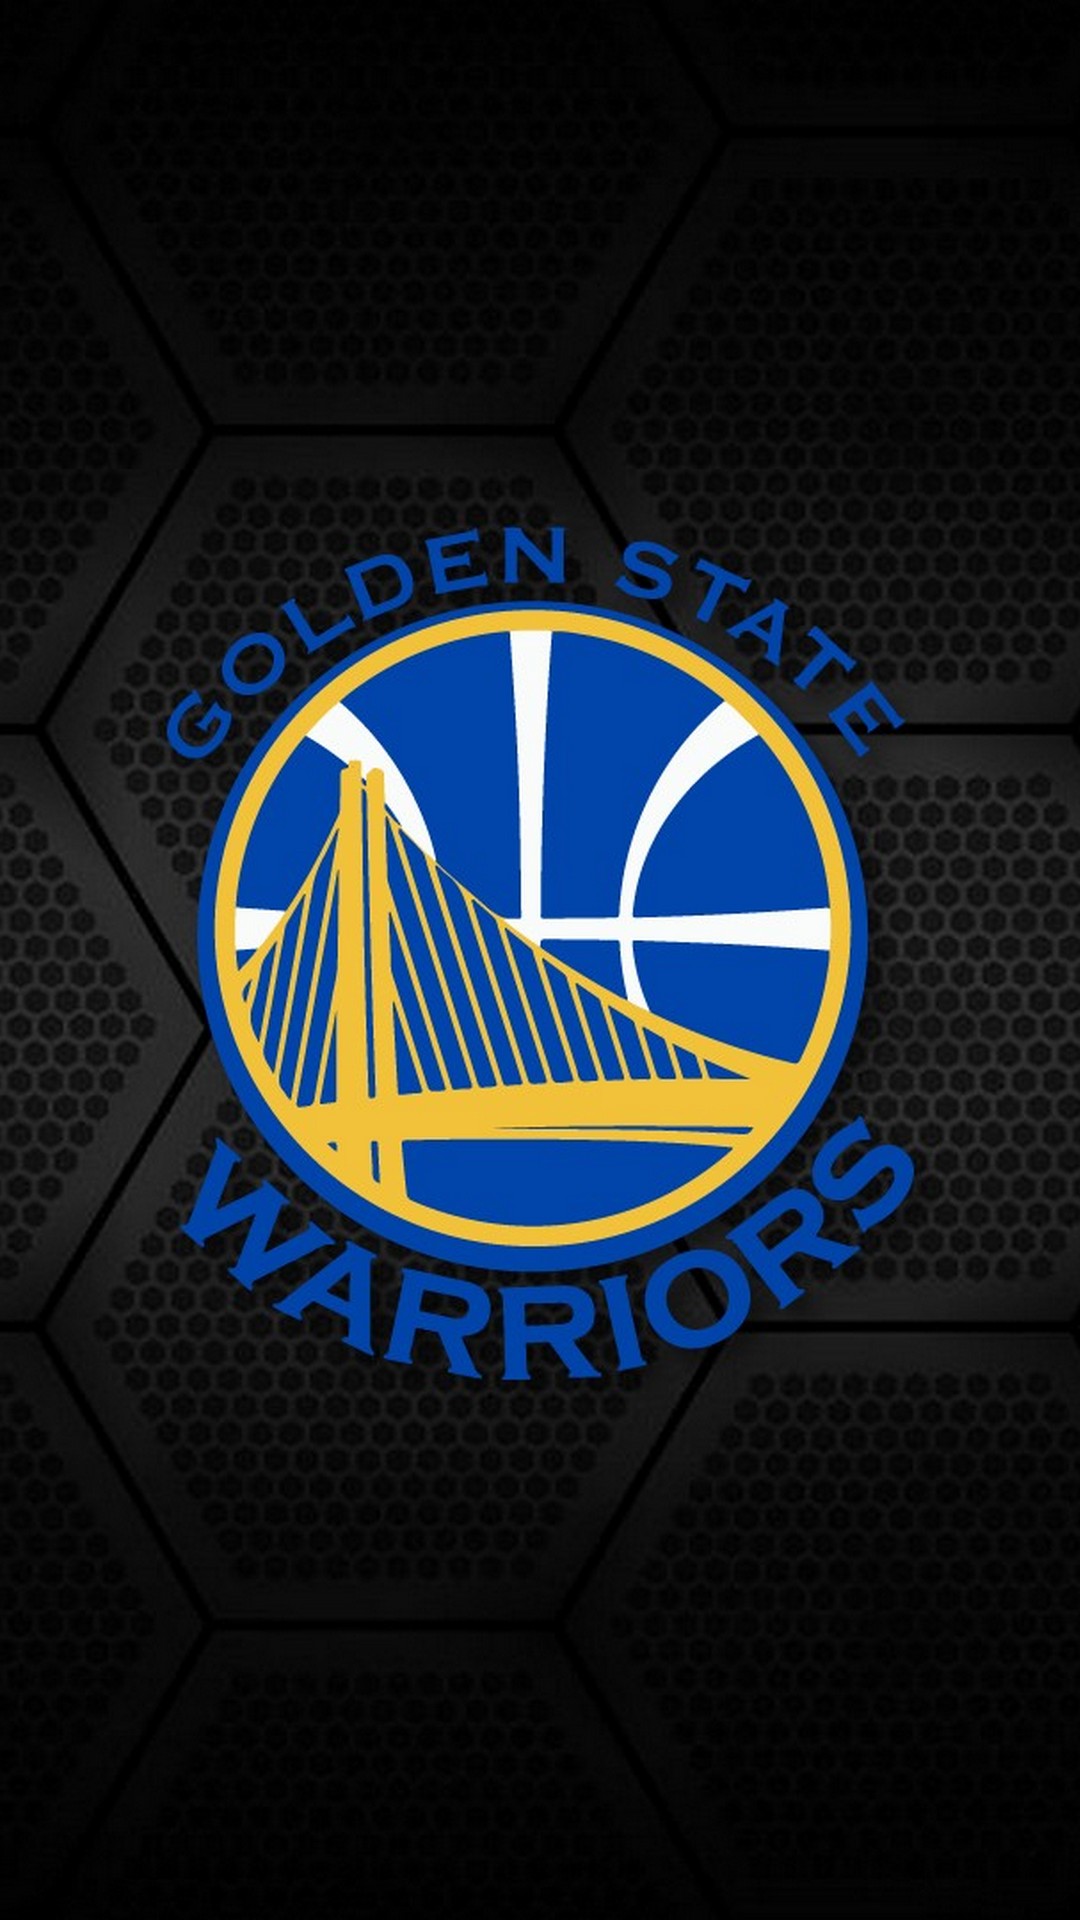 Golden State Warriors iPhone 6 Wallpaper with image dimensions 1080x1920 pixel. You can make this wallpaper for your Desktop Computer Backgrounds, Windows or Mac Screensavers, iPhone Lock screen, Tablet or Android and another Mobile Phone device